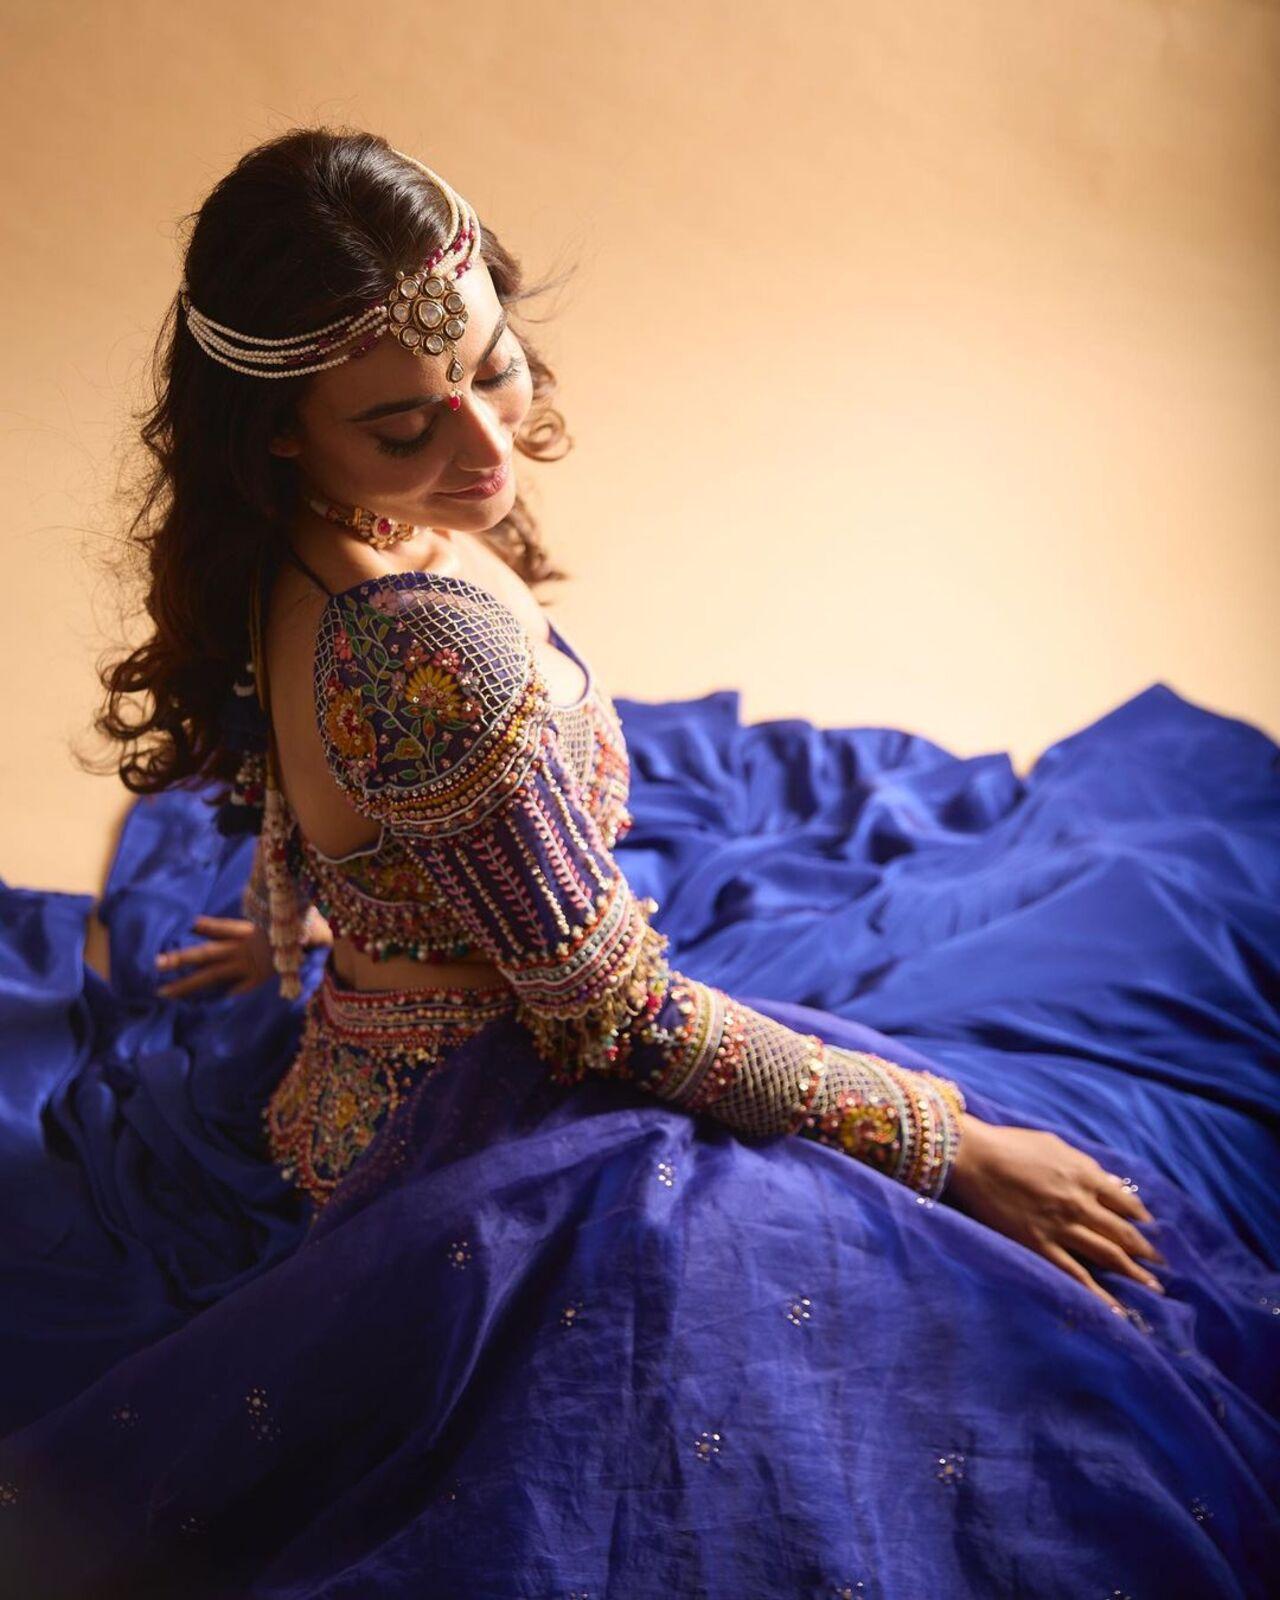 Surbhi Jyoti donned a stunning blue ghagra adorned with intricate embroidery paired with a modern twist – a dupatta-free ensemble